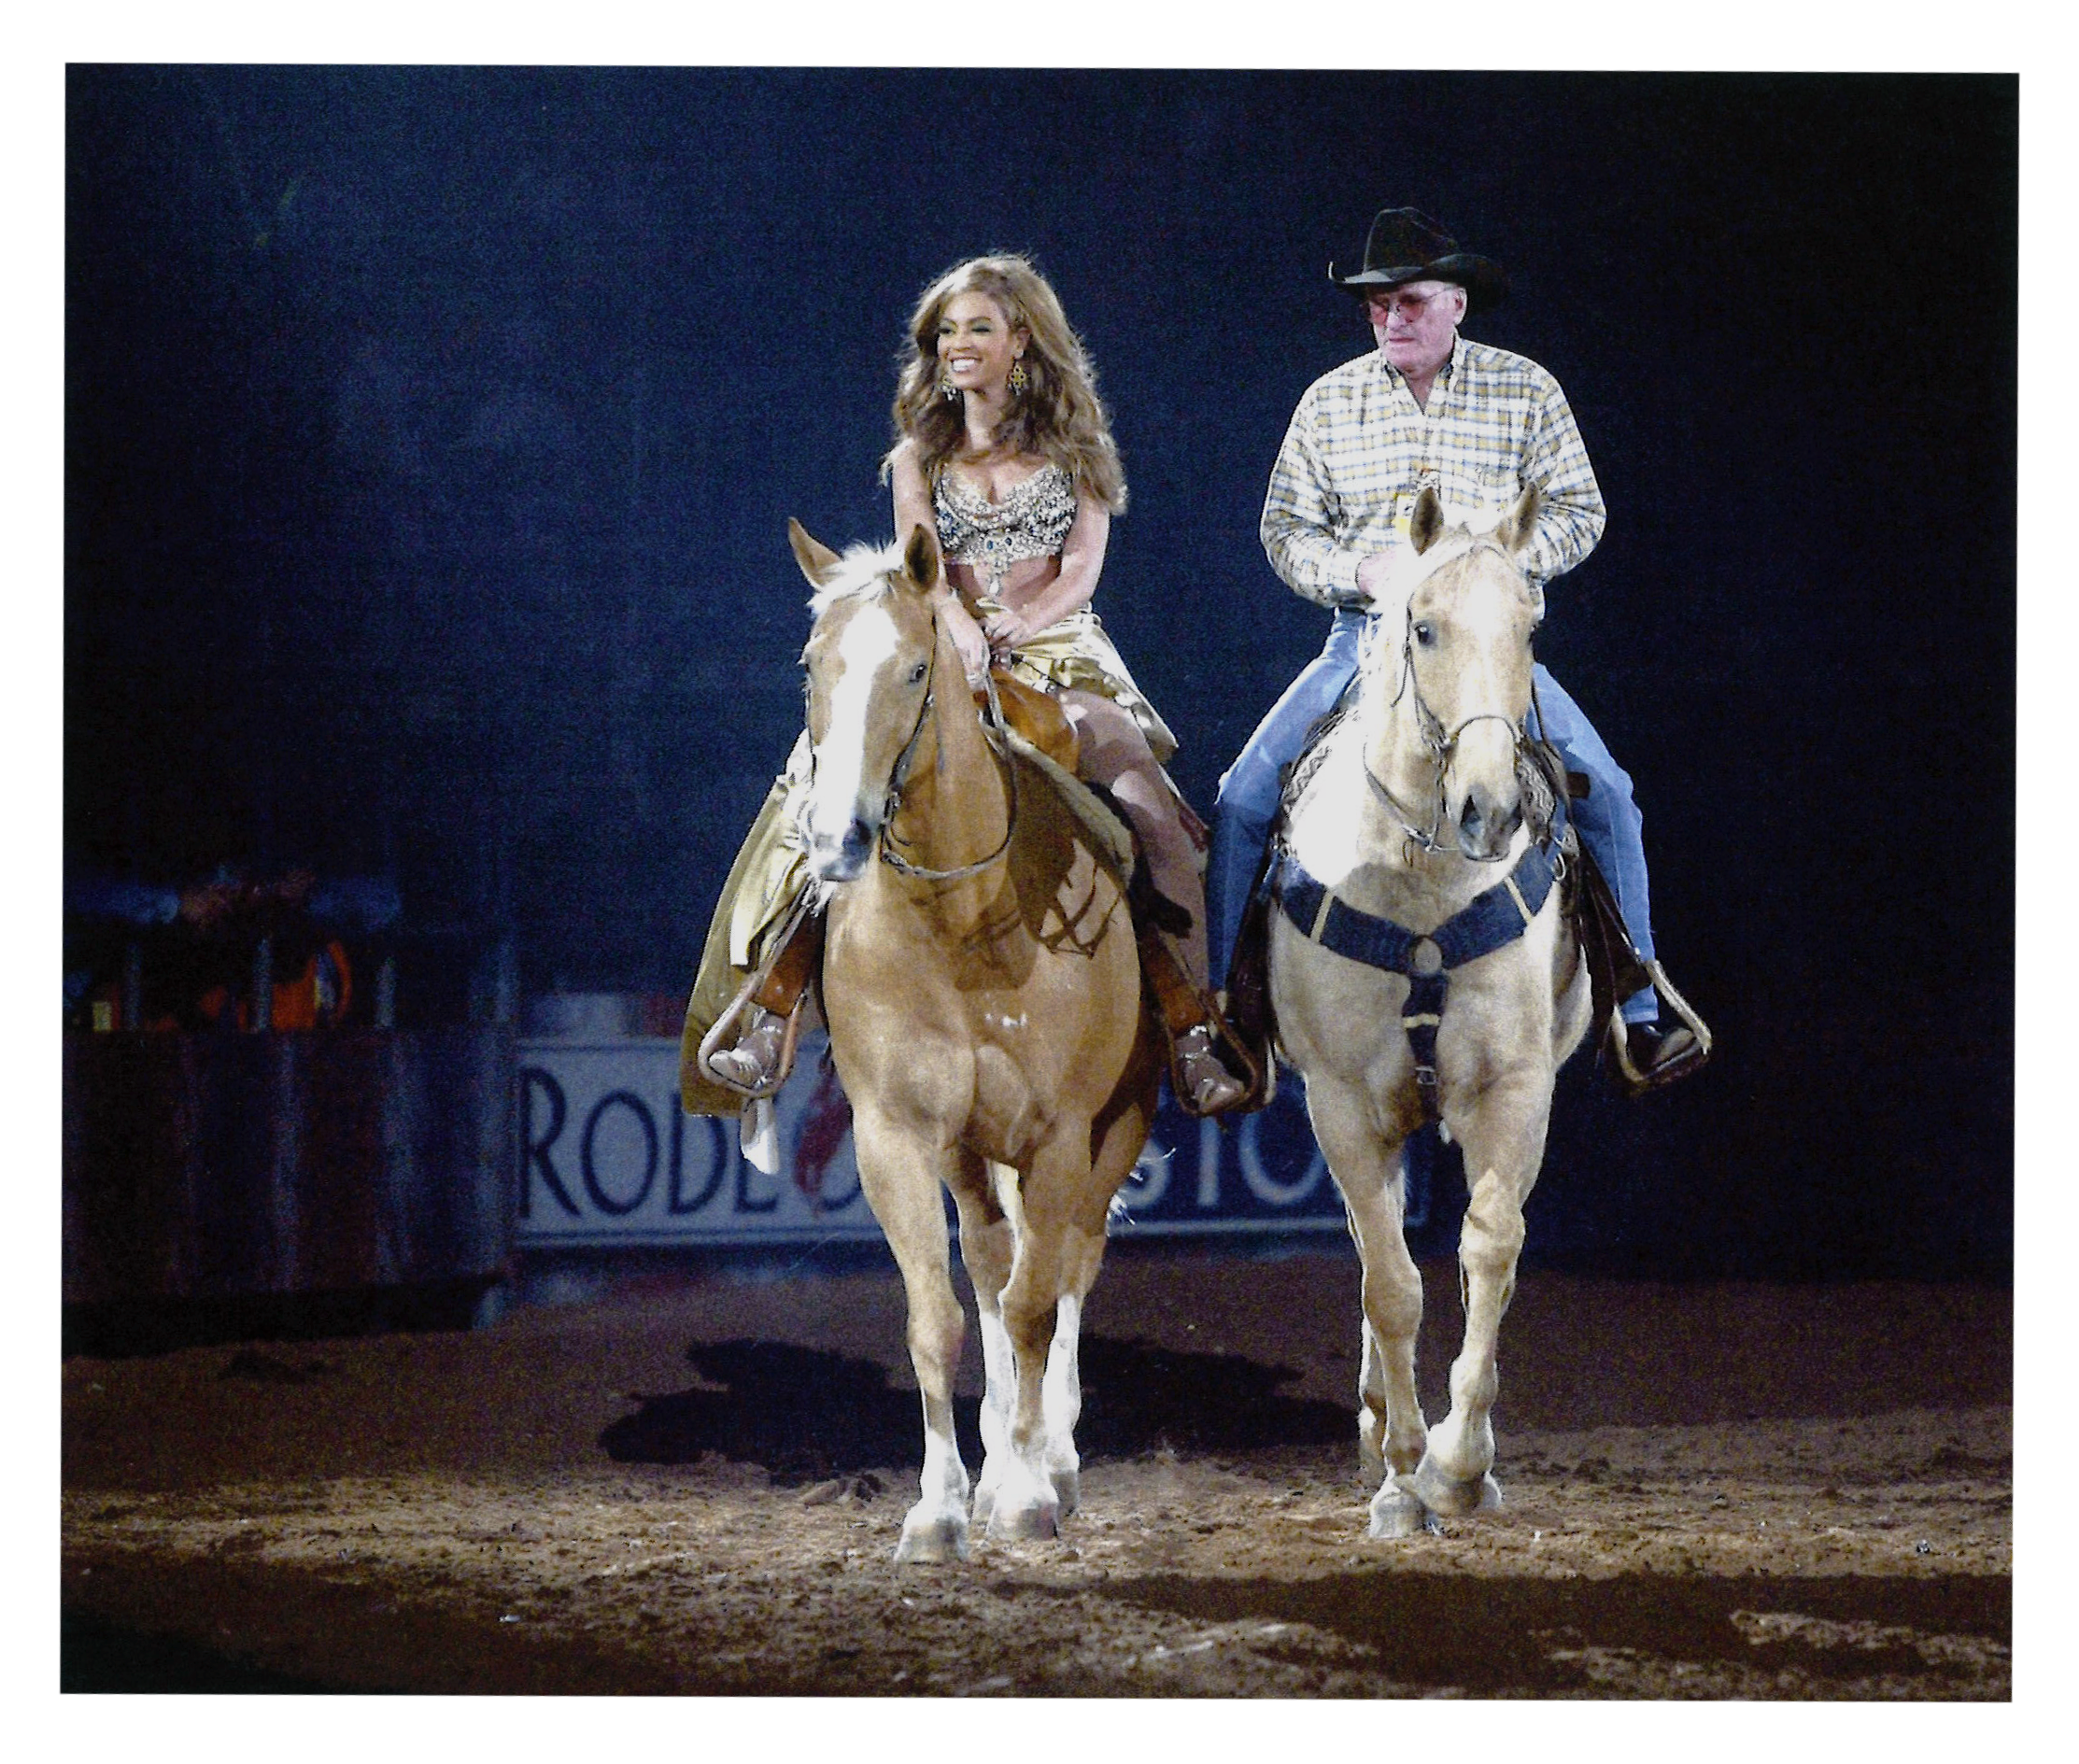 Side by side, two rodeo riders on horses trot toward the camera. One is Beyonce, the other a cowboy